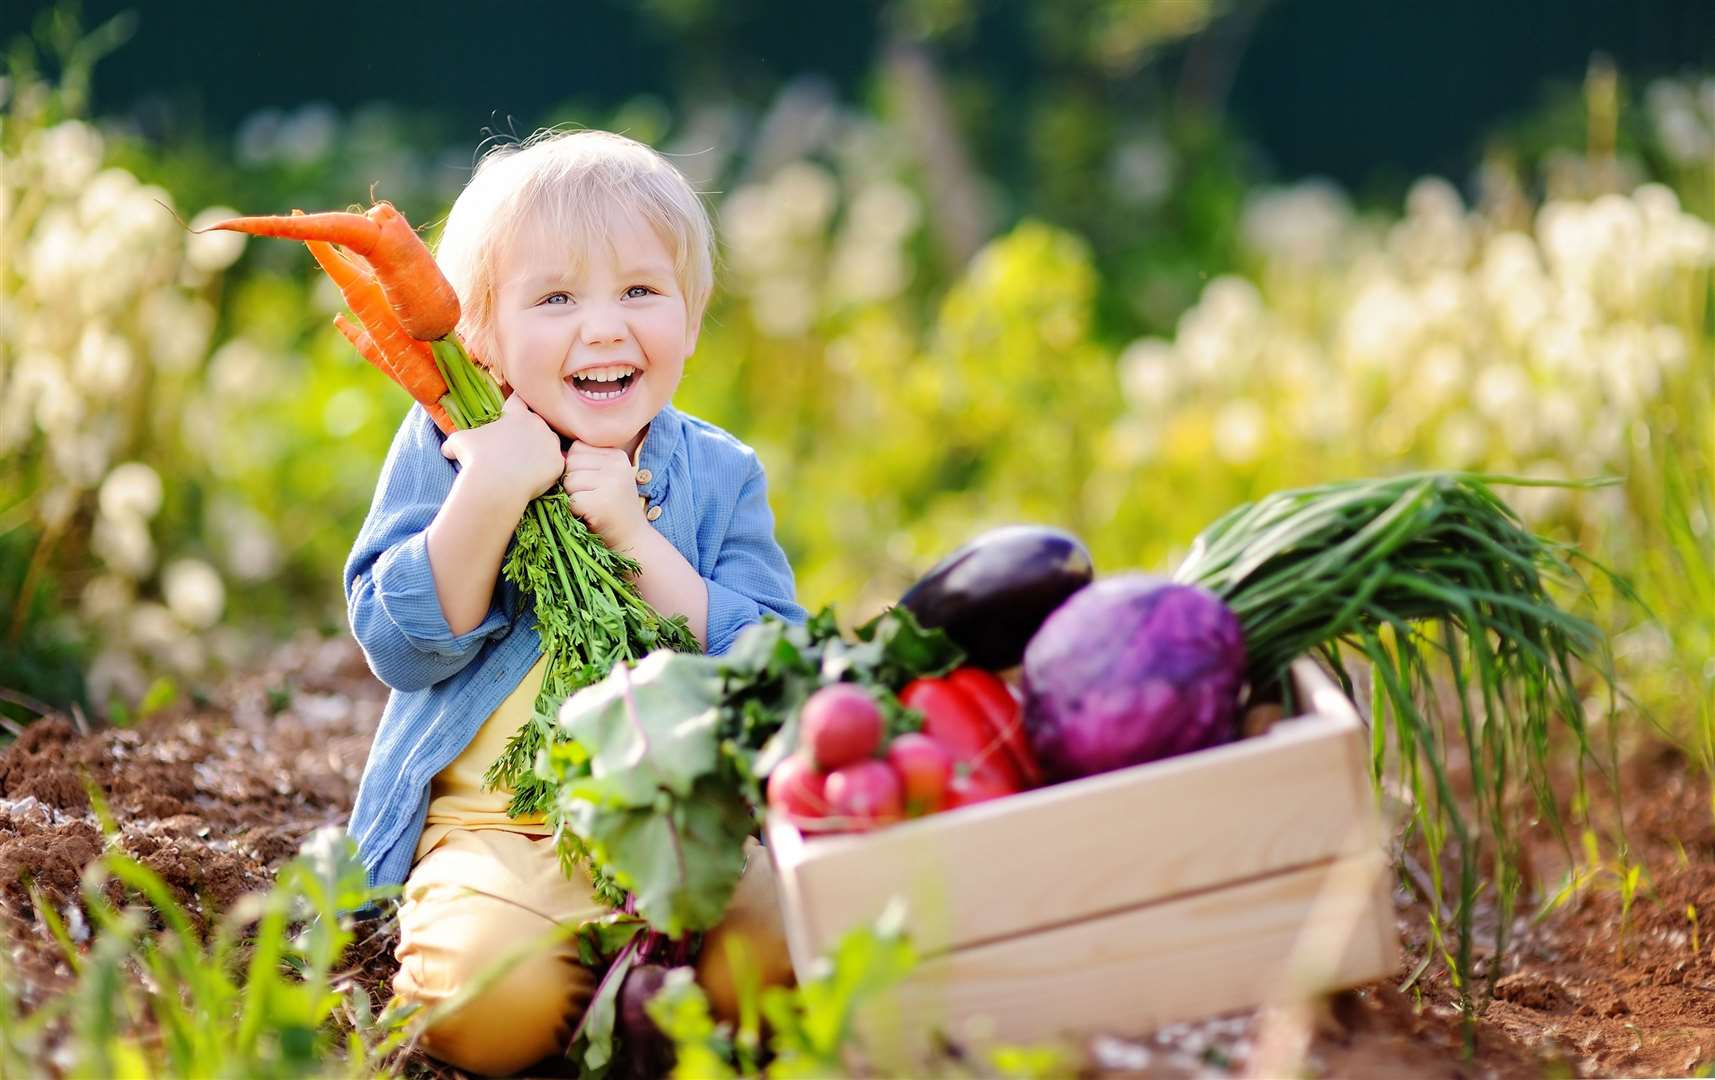 Help your children learn about growing vegetables